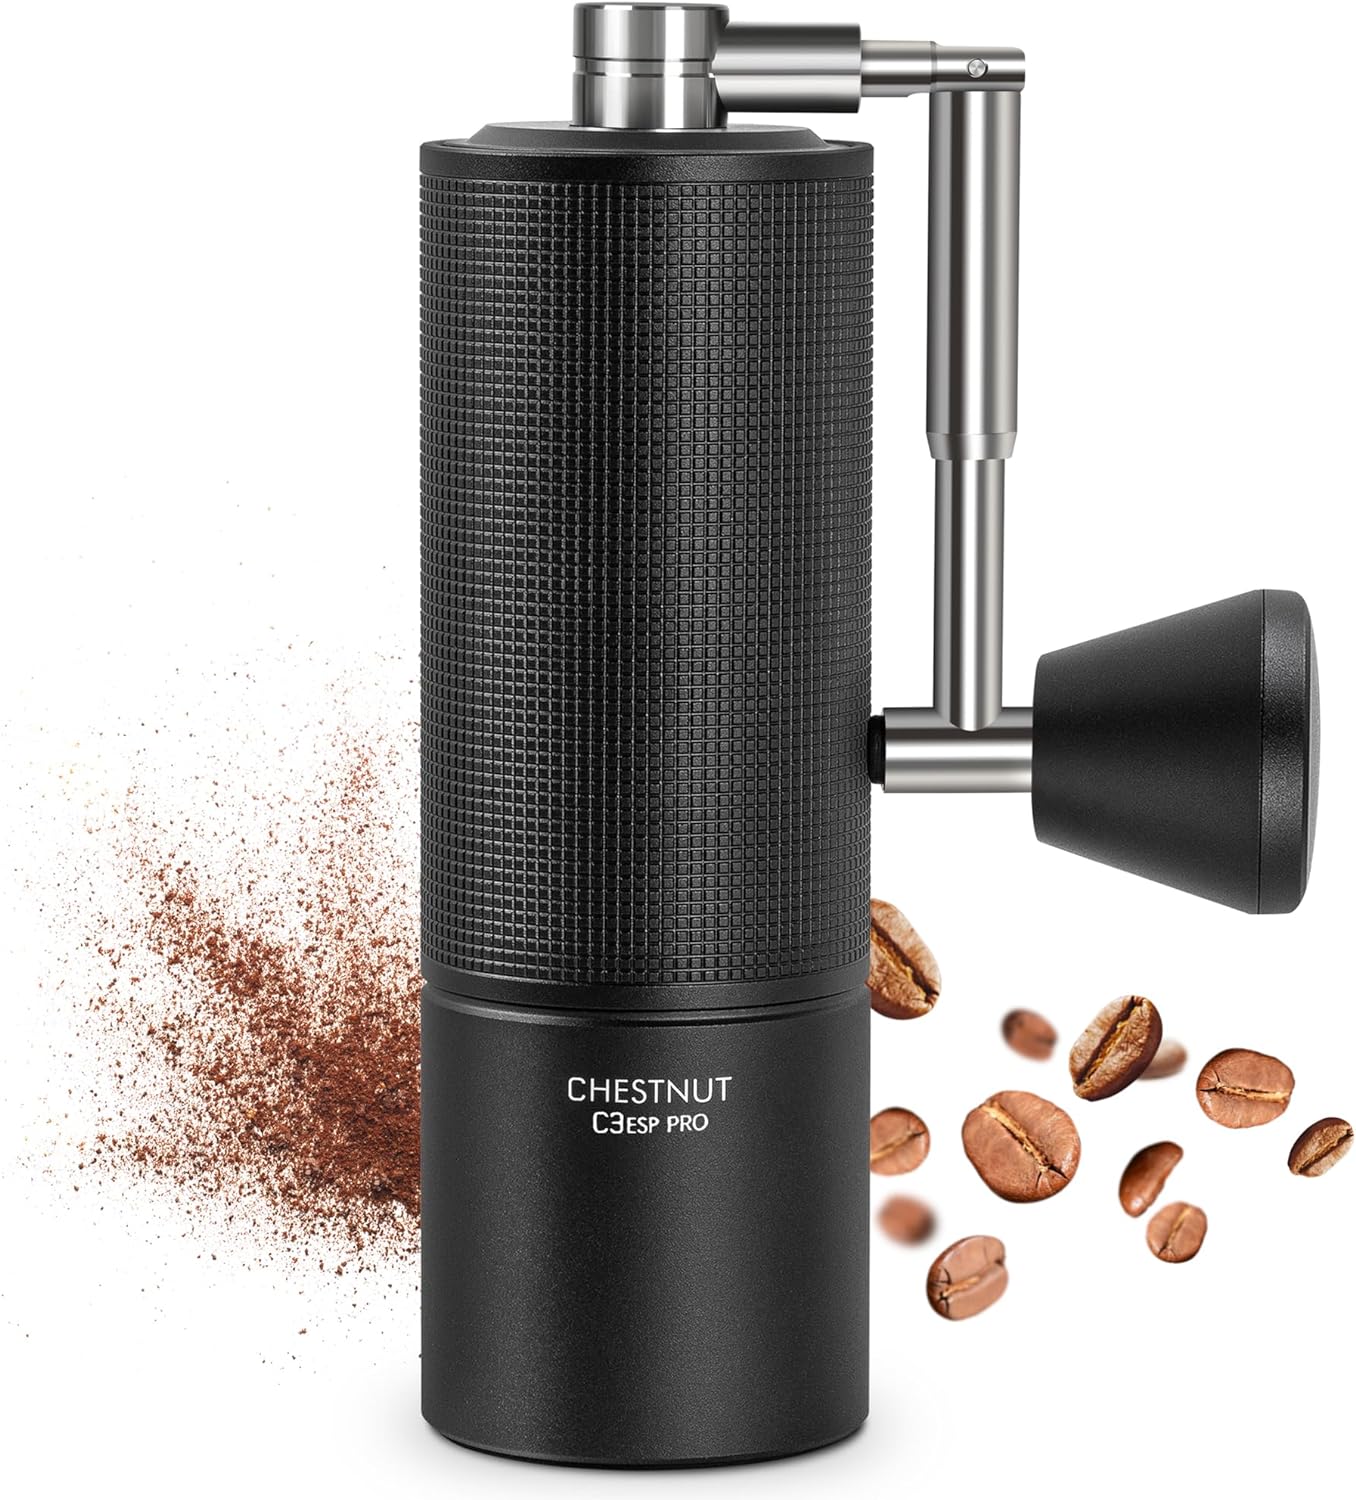 TIMEMORE Chestnut C3 ESP PRO Manual Coffee Grinder Upgrade Integrated All Metal Housing Stainless Steel S2C Cone Cut Hand Coffee Grinder with Folding Handle for Espresso to French Press Black
